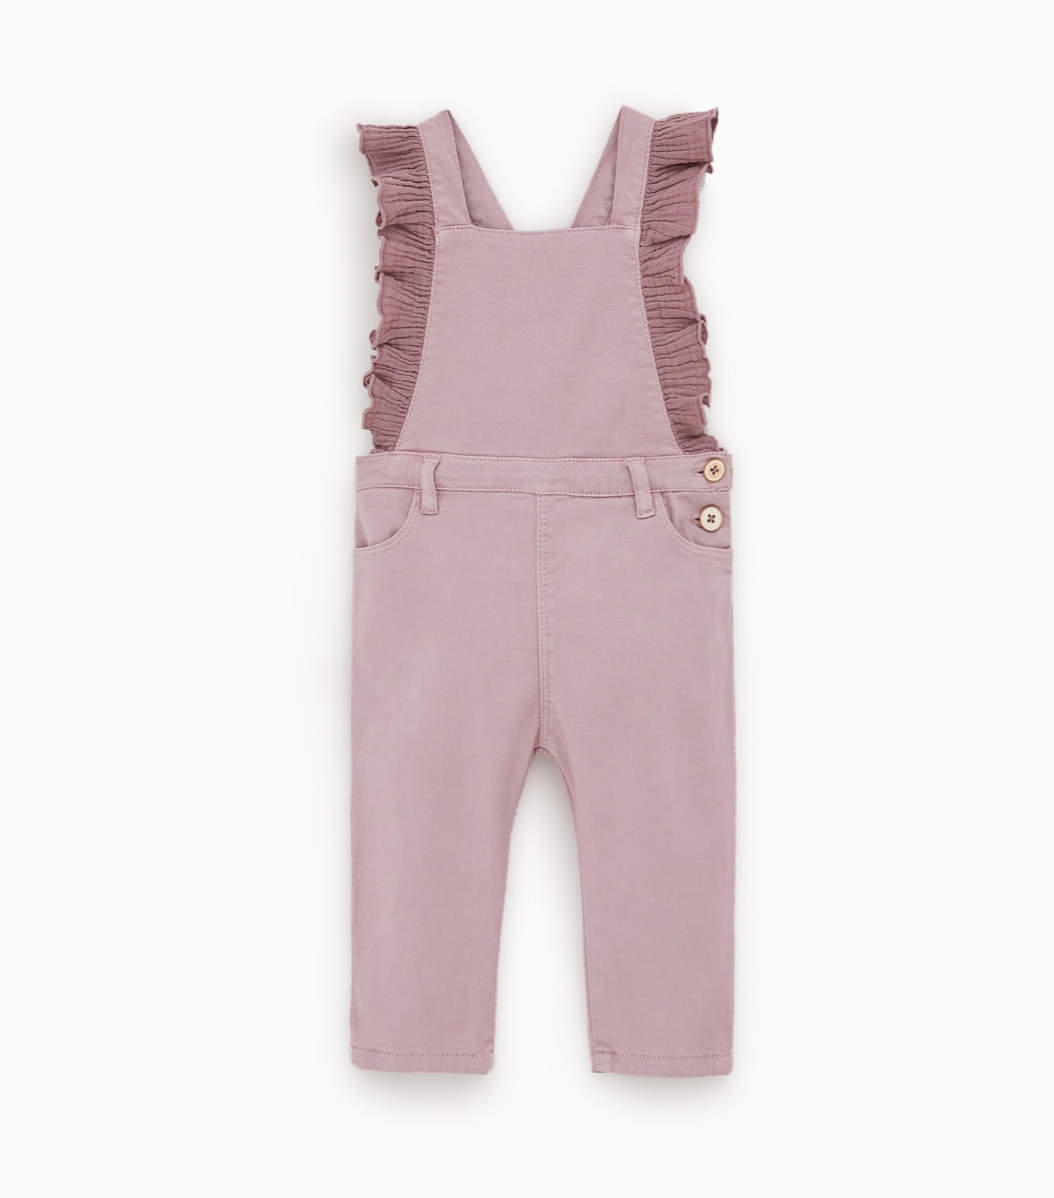 Mauve overalls with a ruffle on the sleeve in a toddler girl size. Set on a plain white background